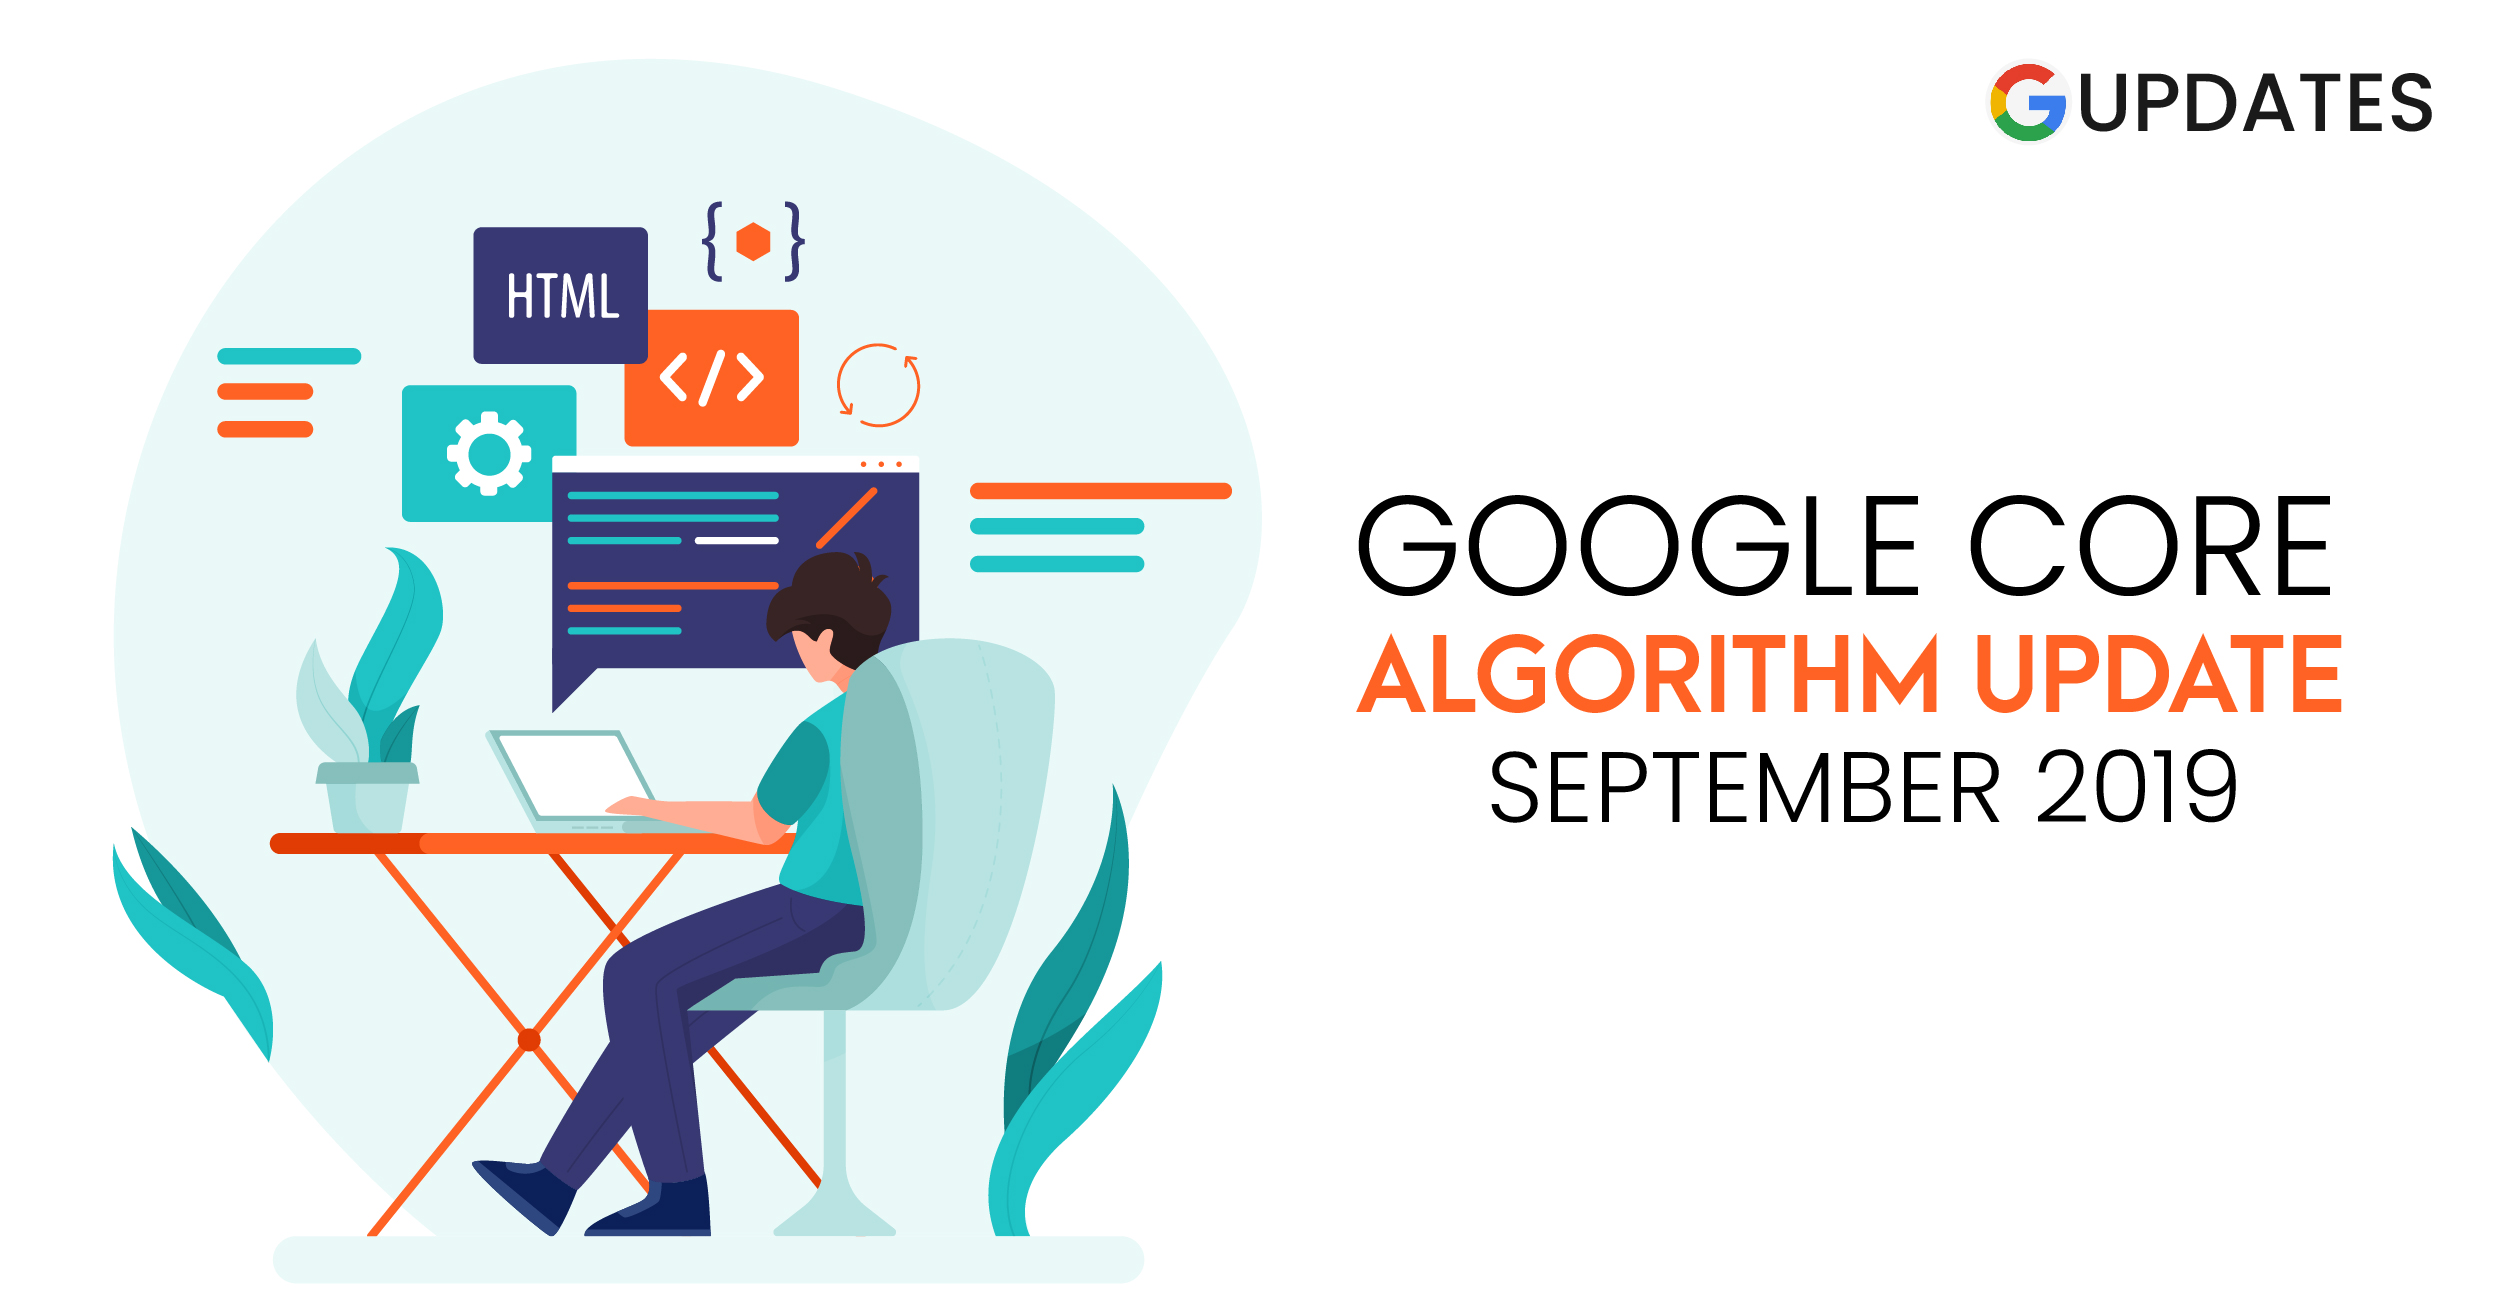 Google Core Algorithm Update Sept 2019 | Insights Included